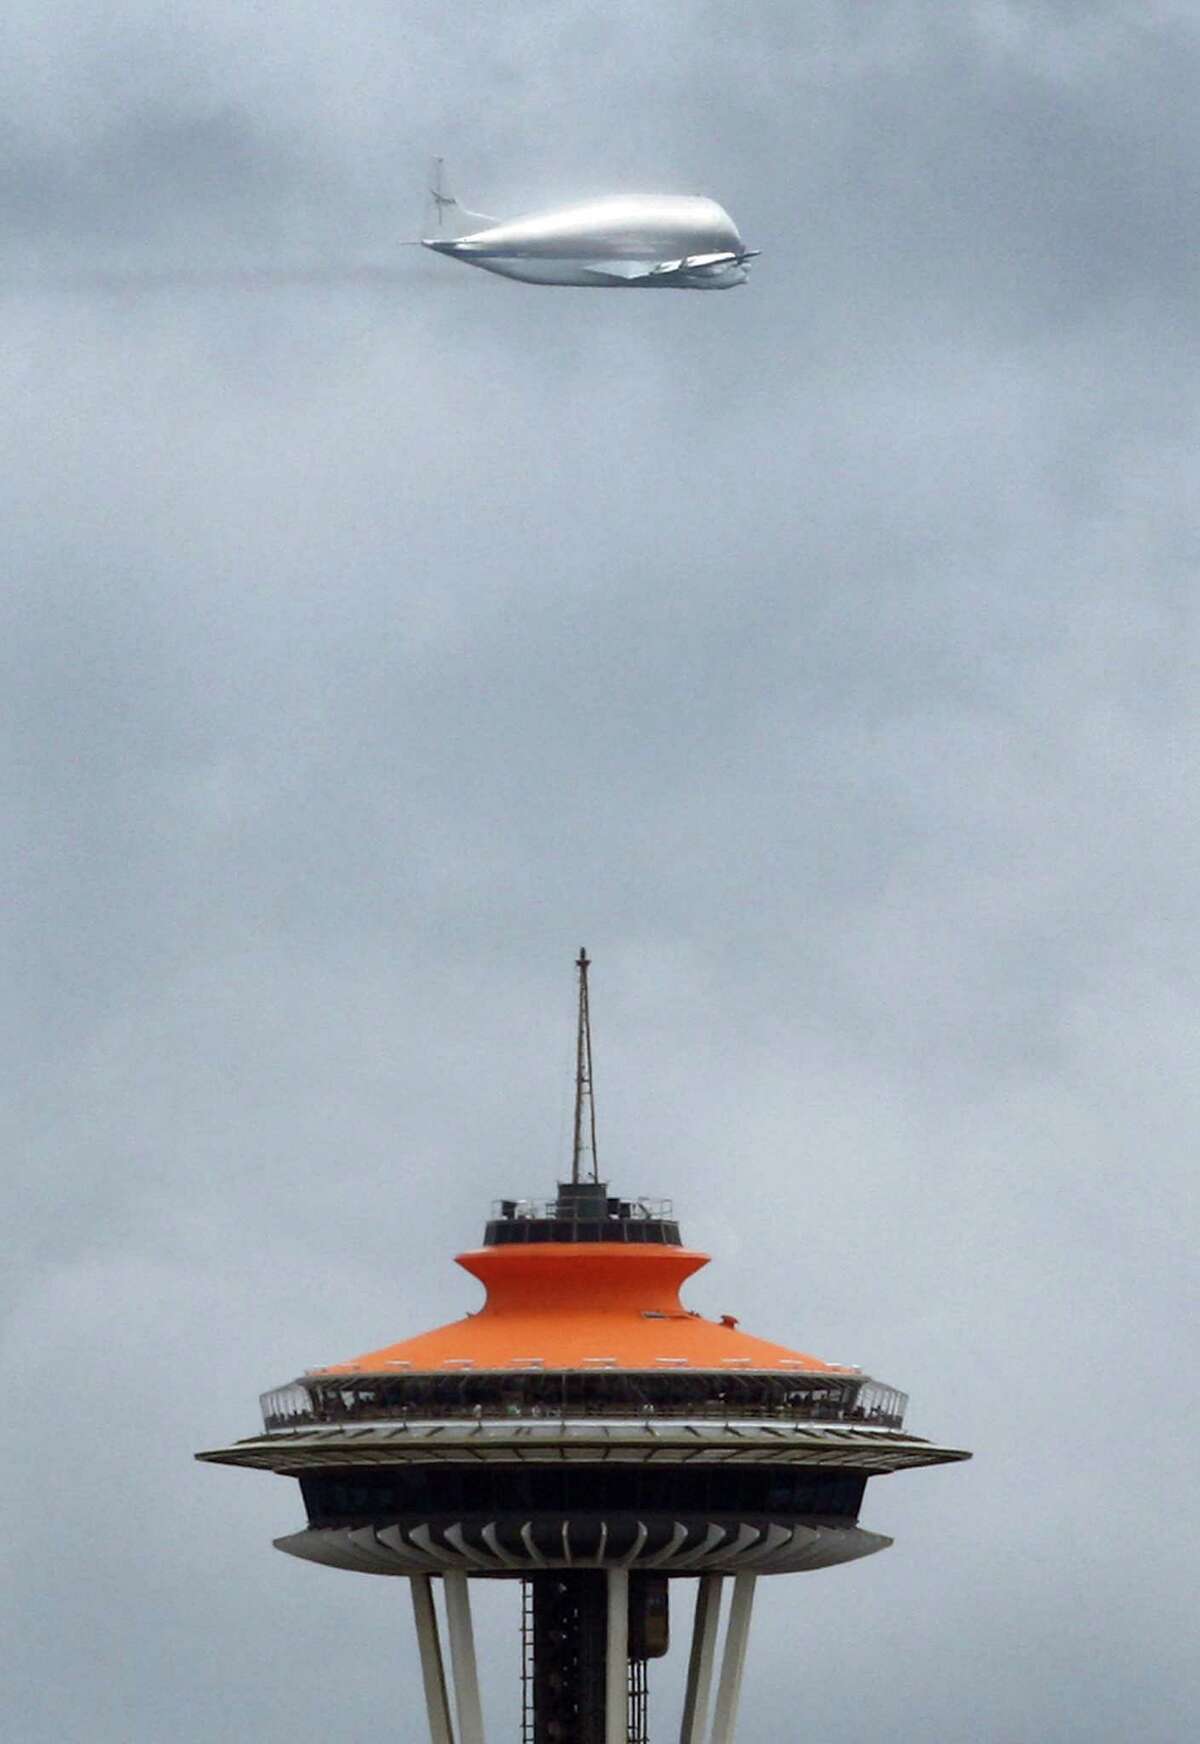 NASA's Super Guppy airplane flies over downtown Seattle on its way to Boeing Field and the Museum of Flight. The unique aircraft was carrying the crew compartment of NASA's Space Shuttle Full Fuselage Trainer, an artifact being donated to the museum.